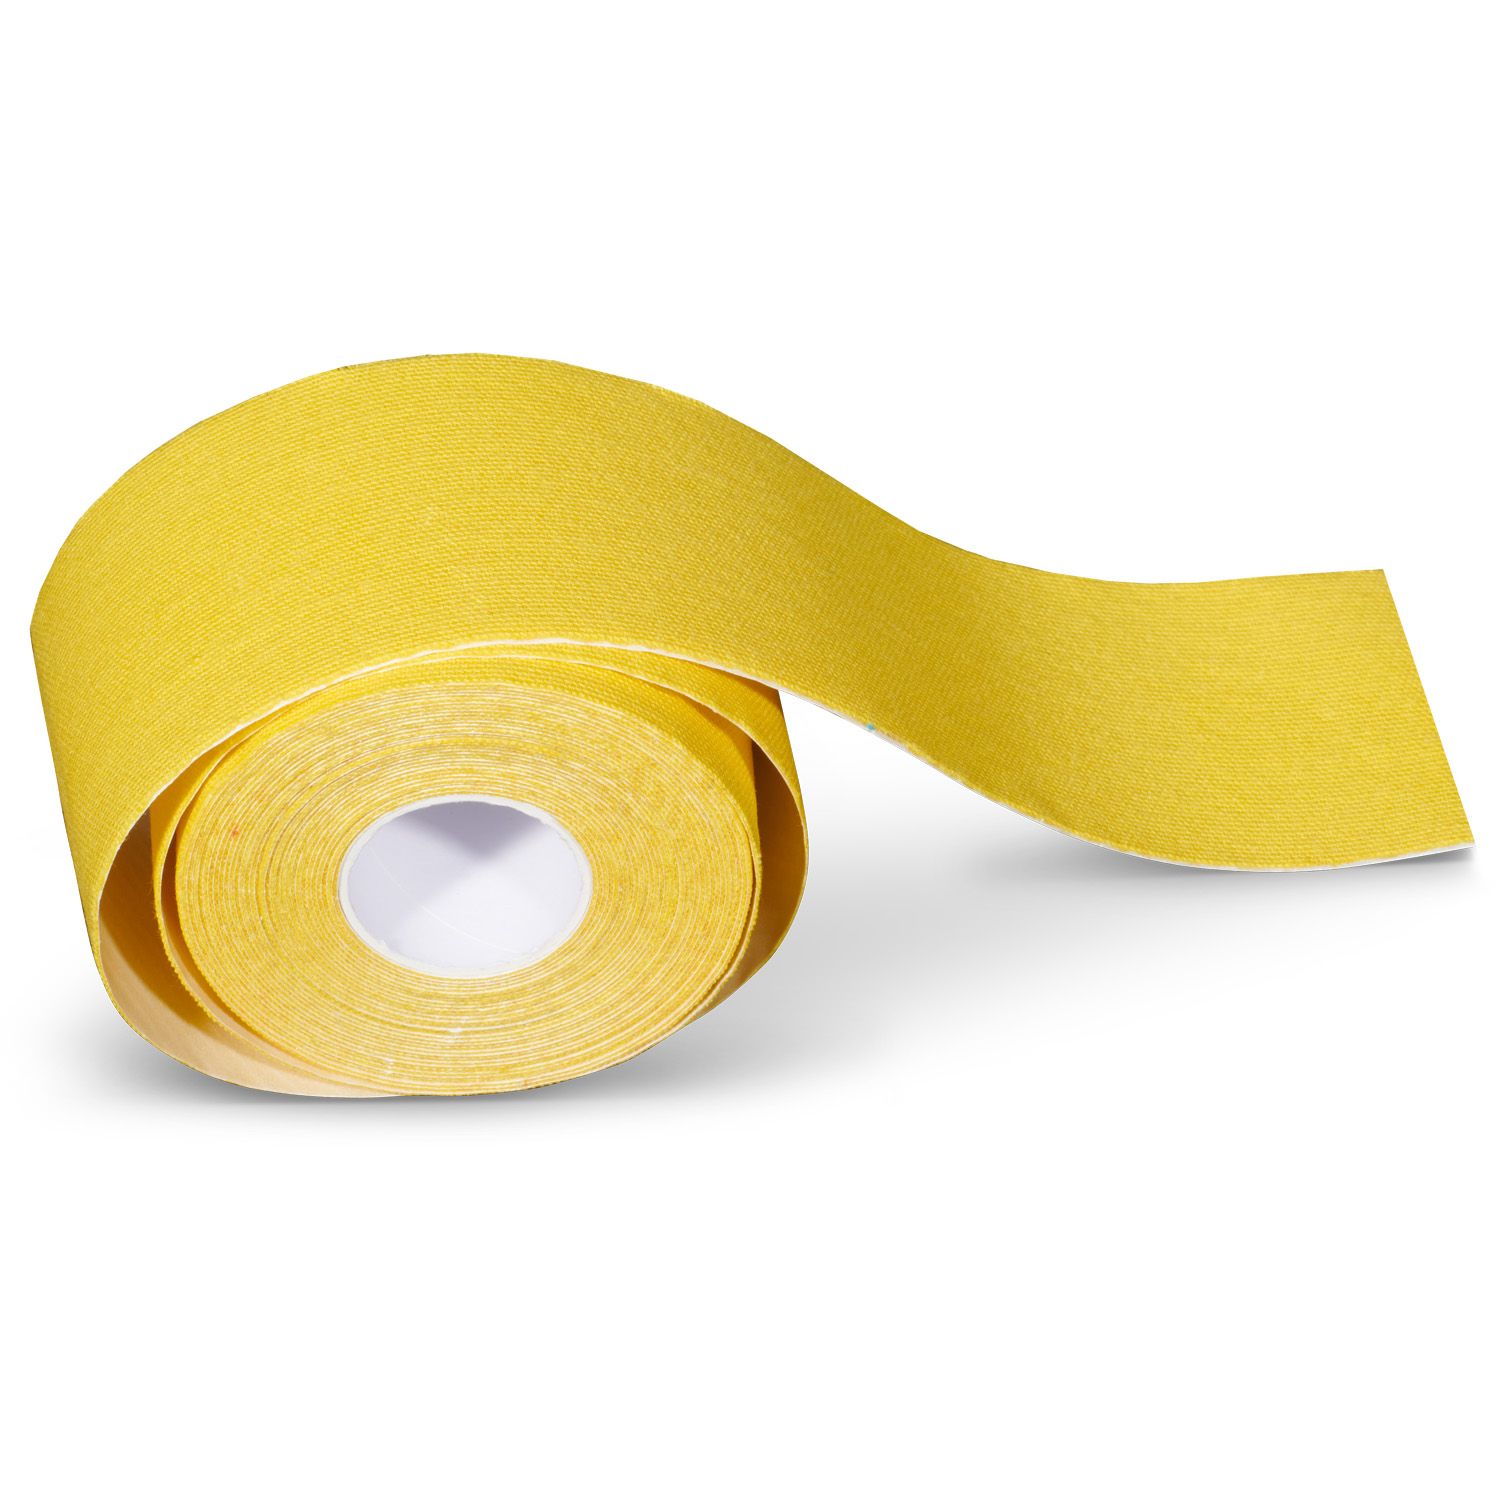 Kinesiology tape 12 rolls plus 3 rolls for free yellow